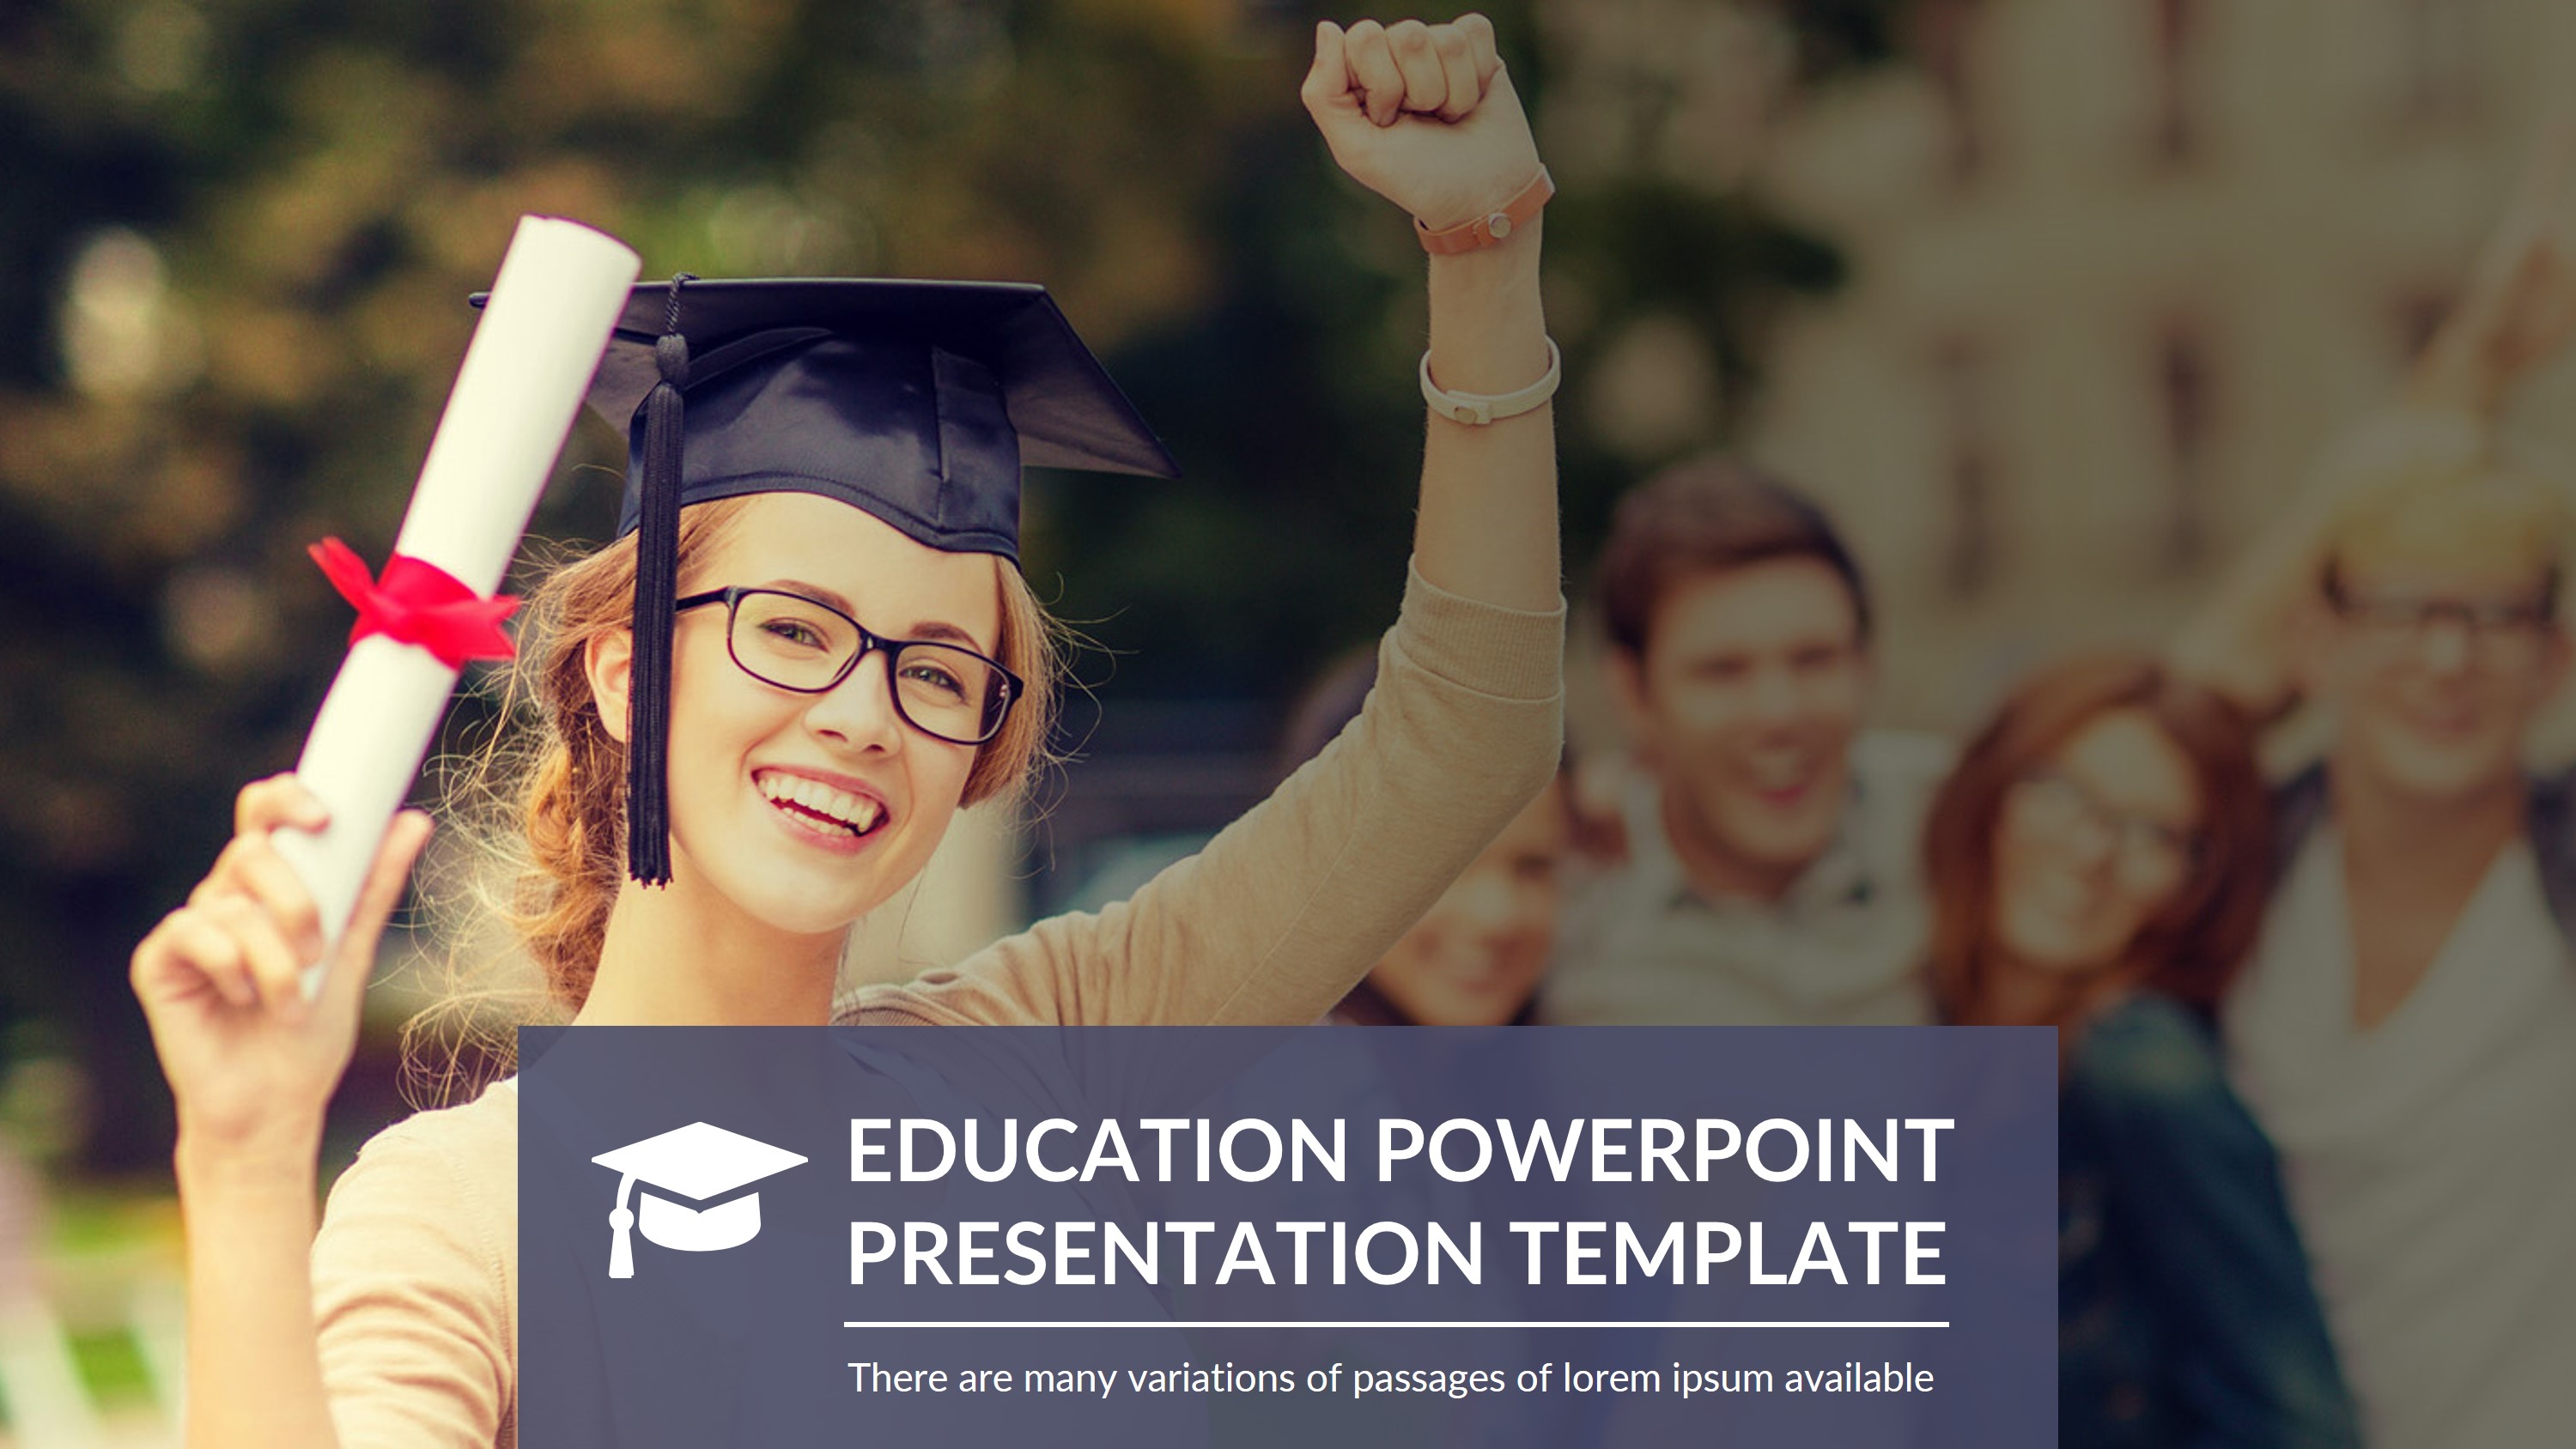 what is education powerpoint presentation